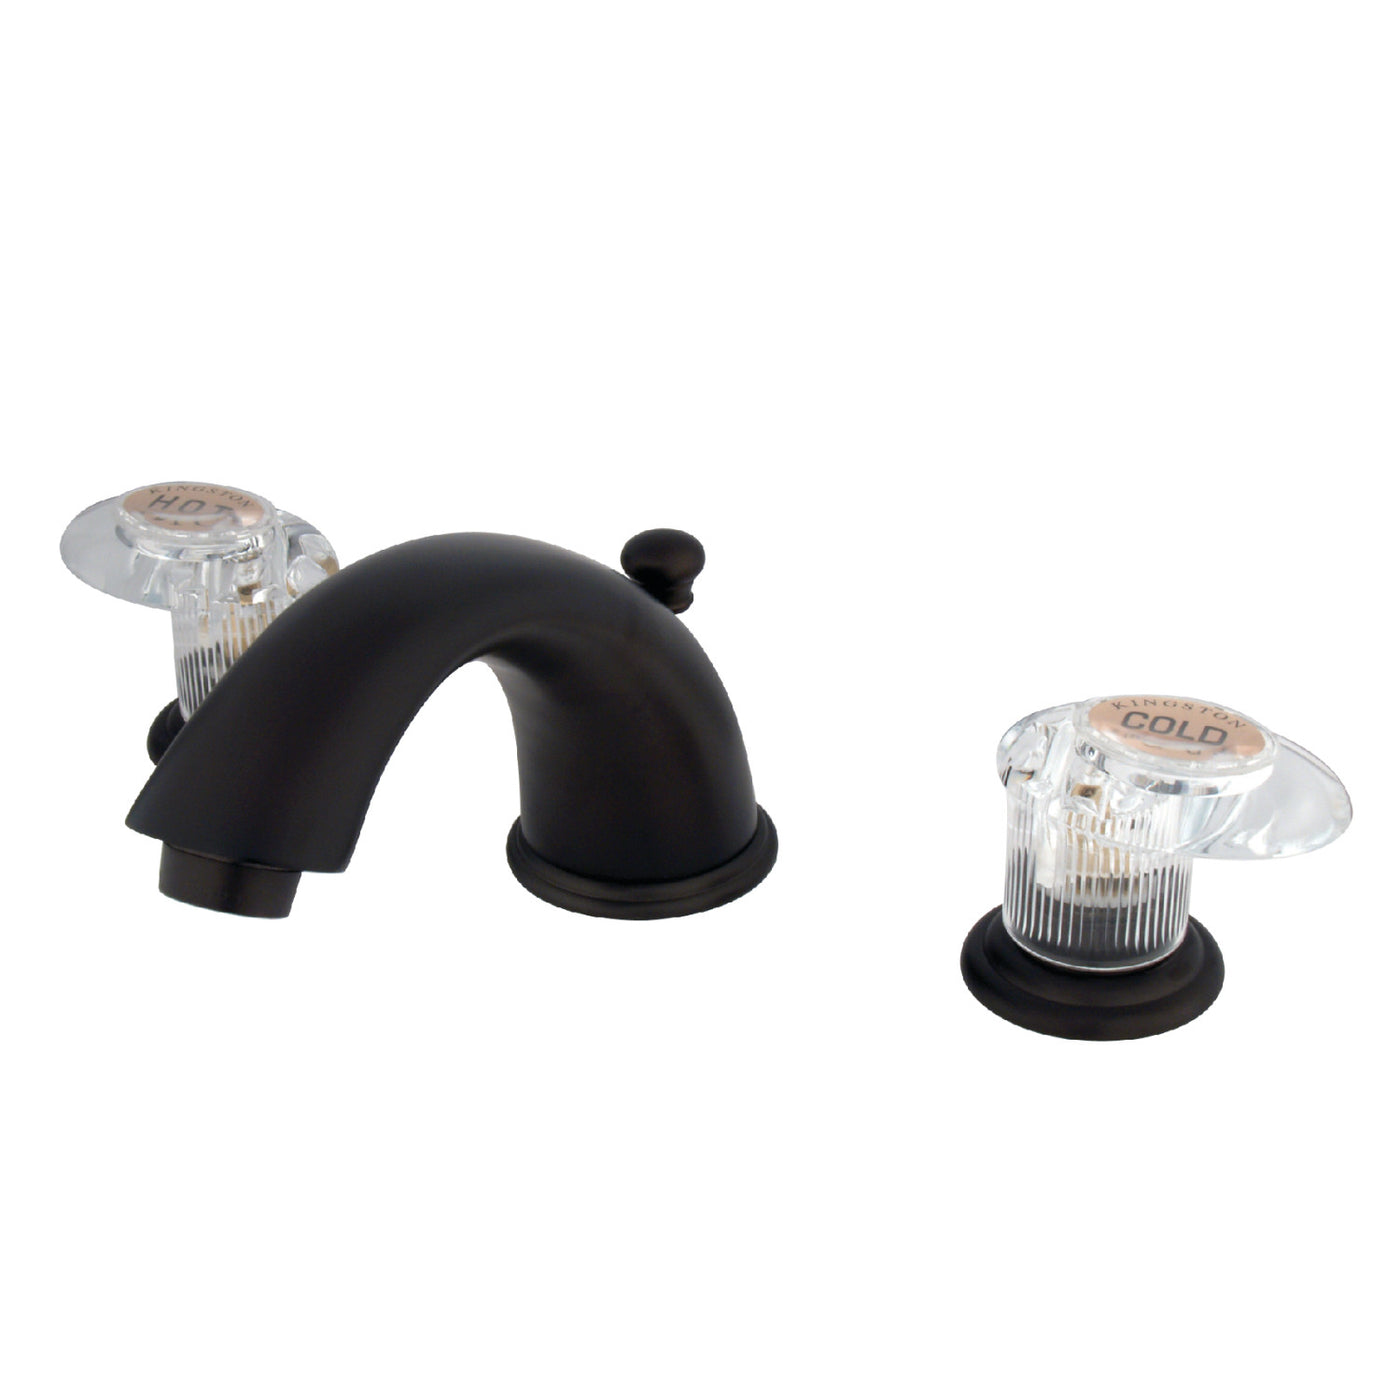 Elements of Design EB965ALL Widespread Bathroom Faucet with Retail Pop-Up, Oil Rubbed Bronze